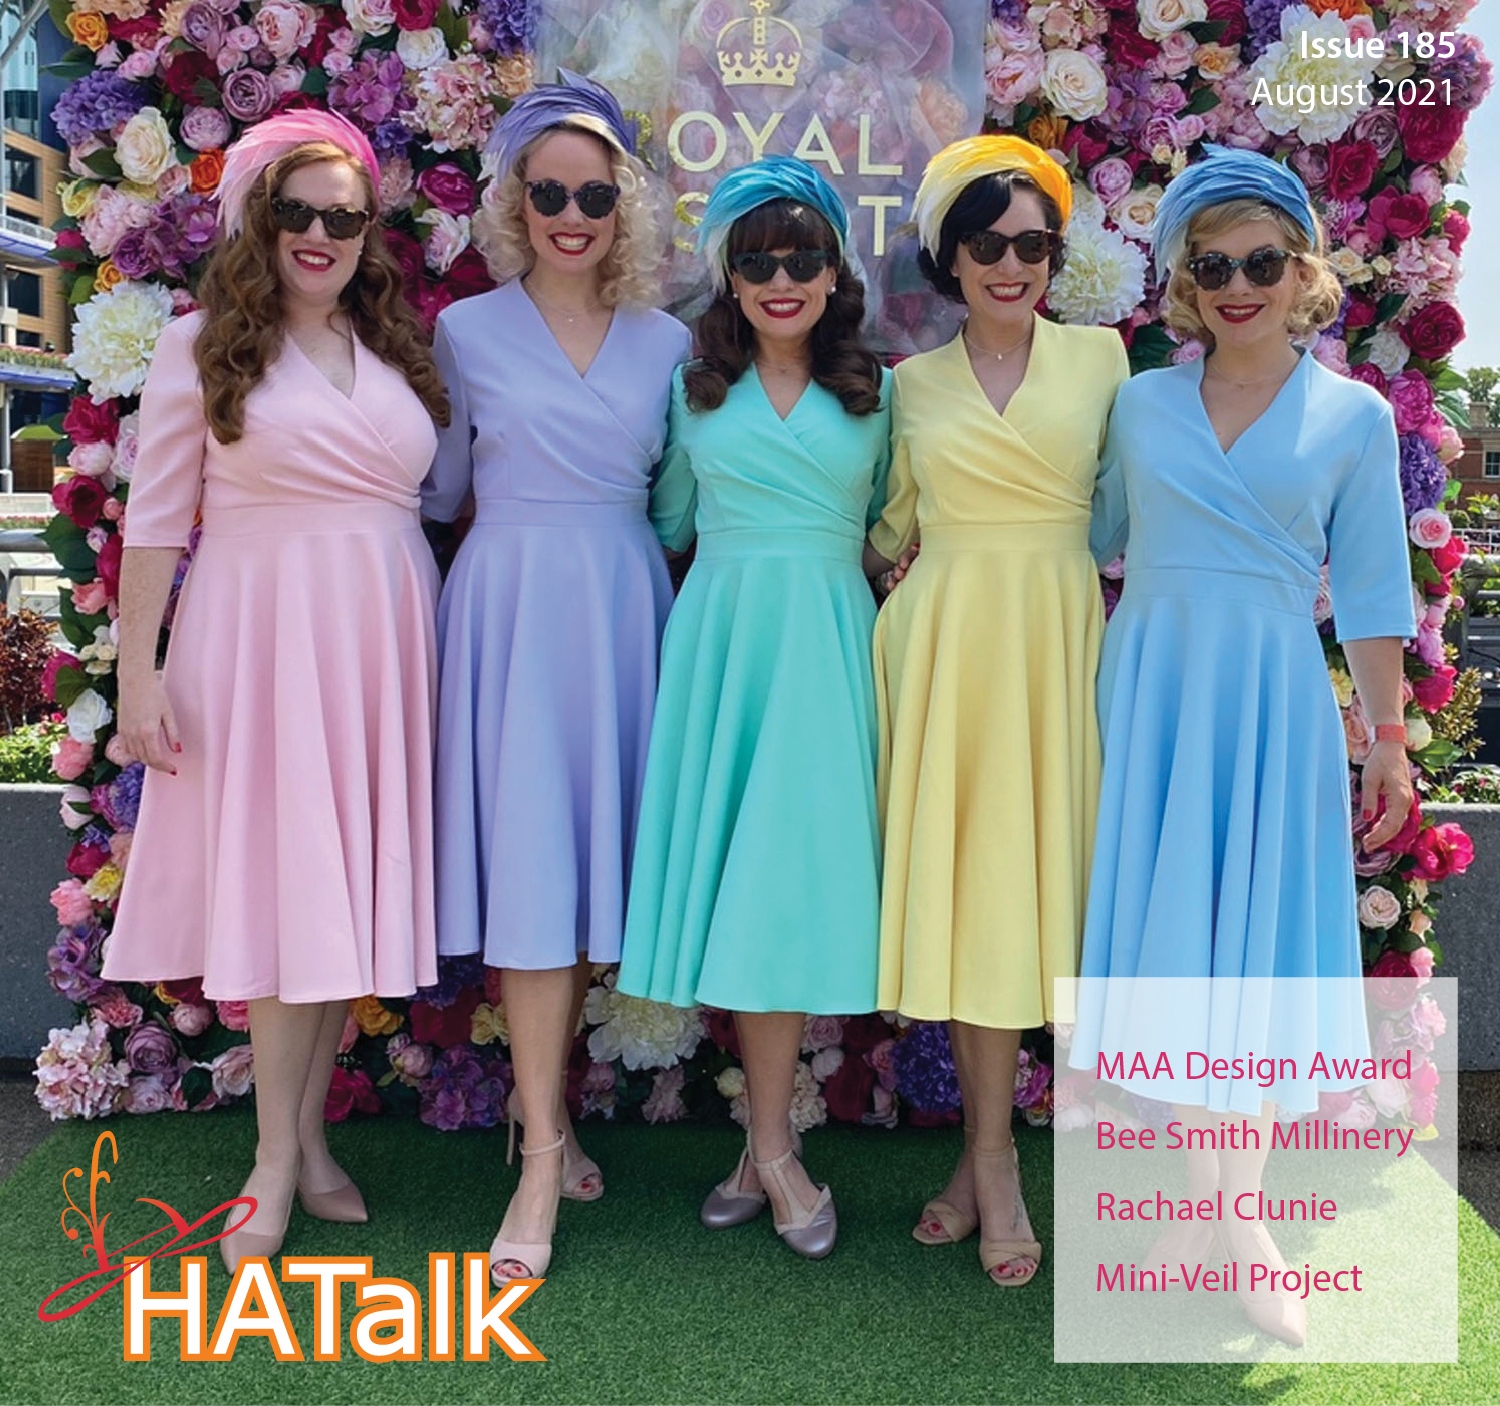 HATalk Issue 185 - August 2021. The Tootsie Rollers wear Bee Smith Millinery on the cover.